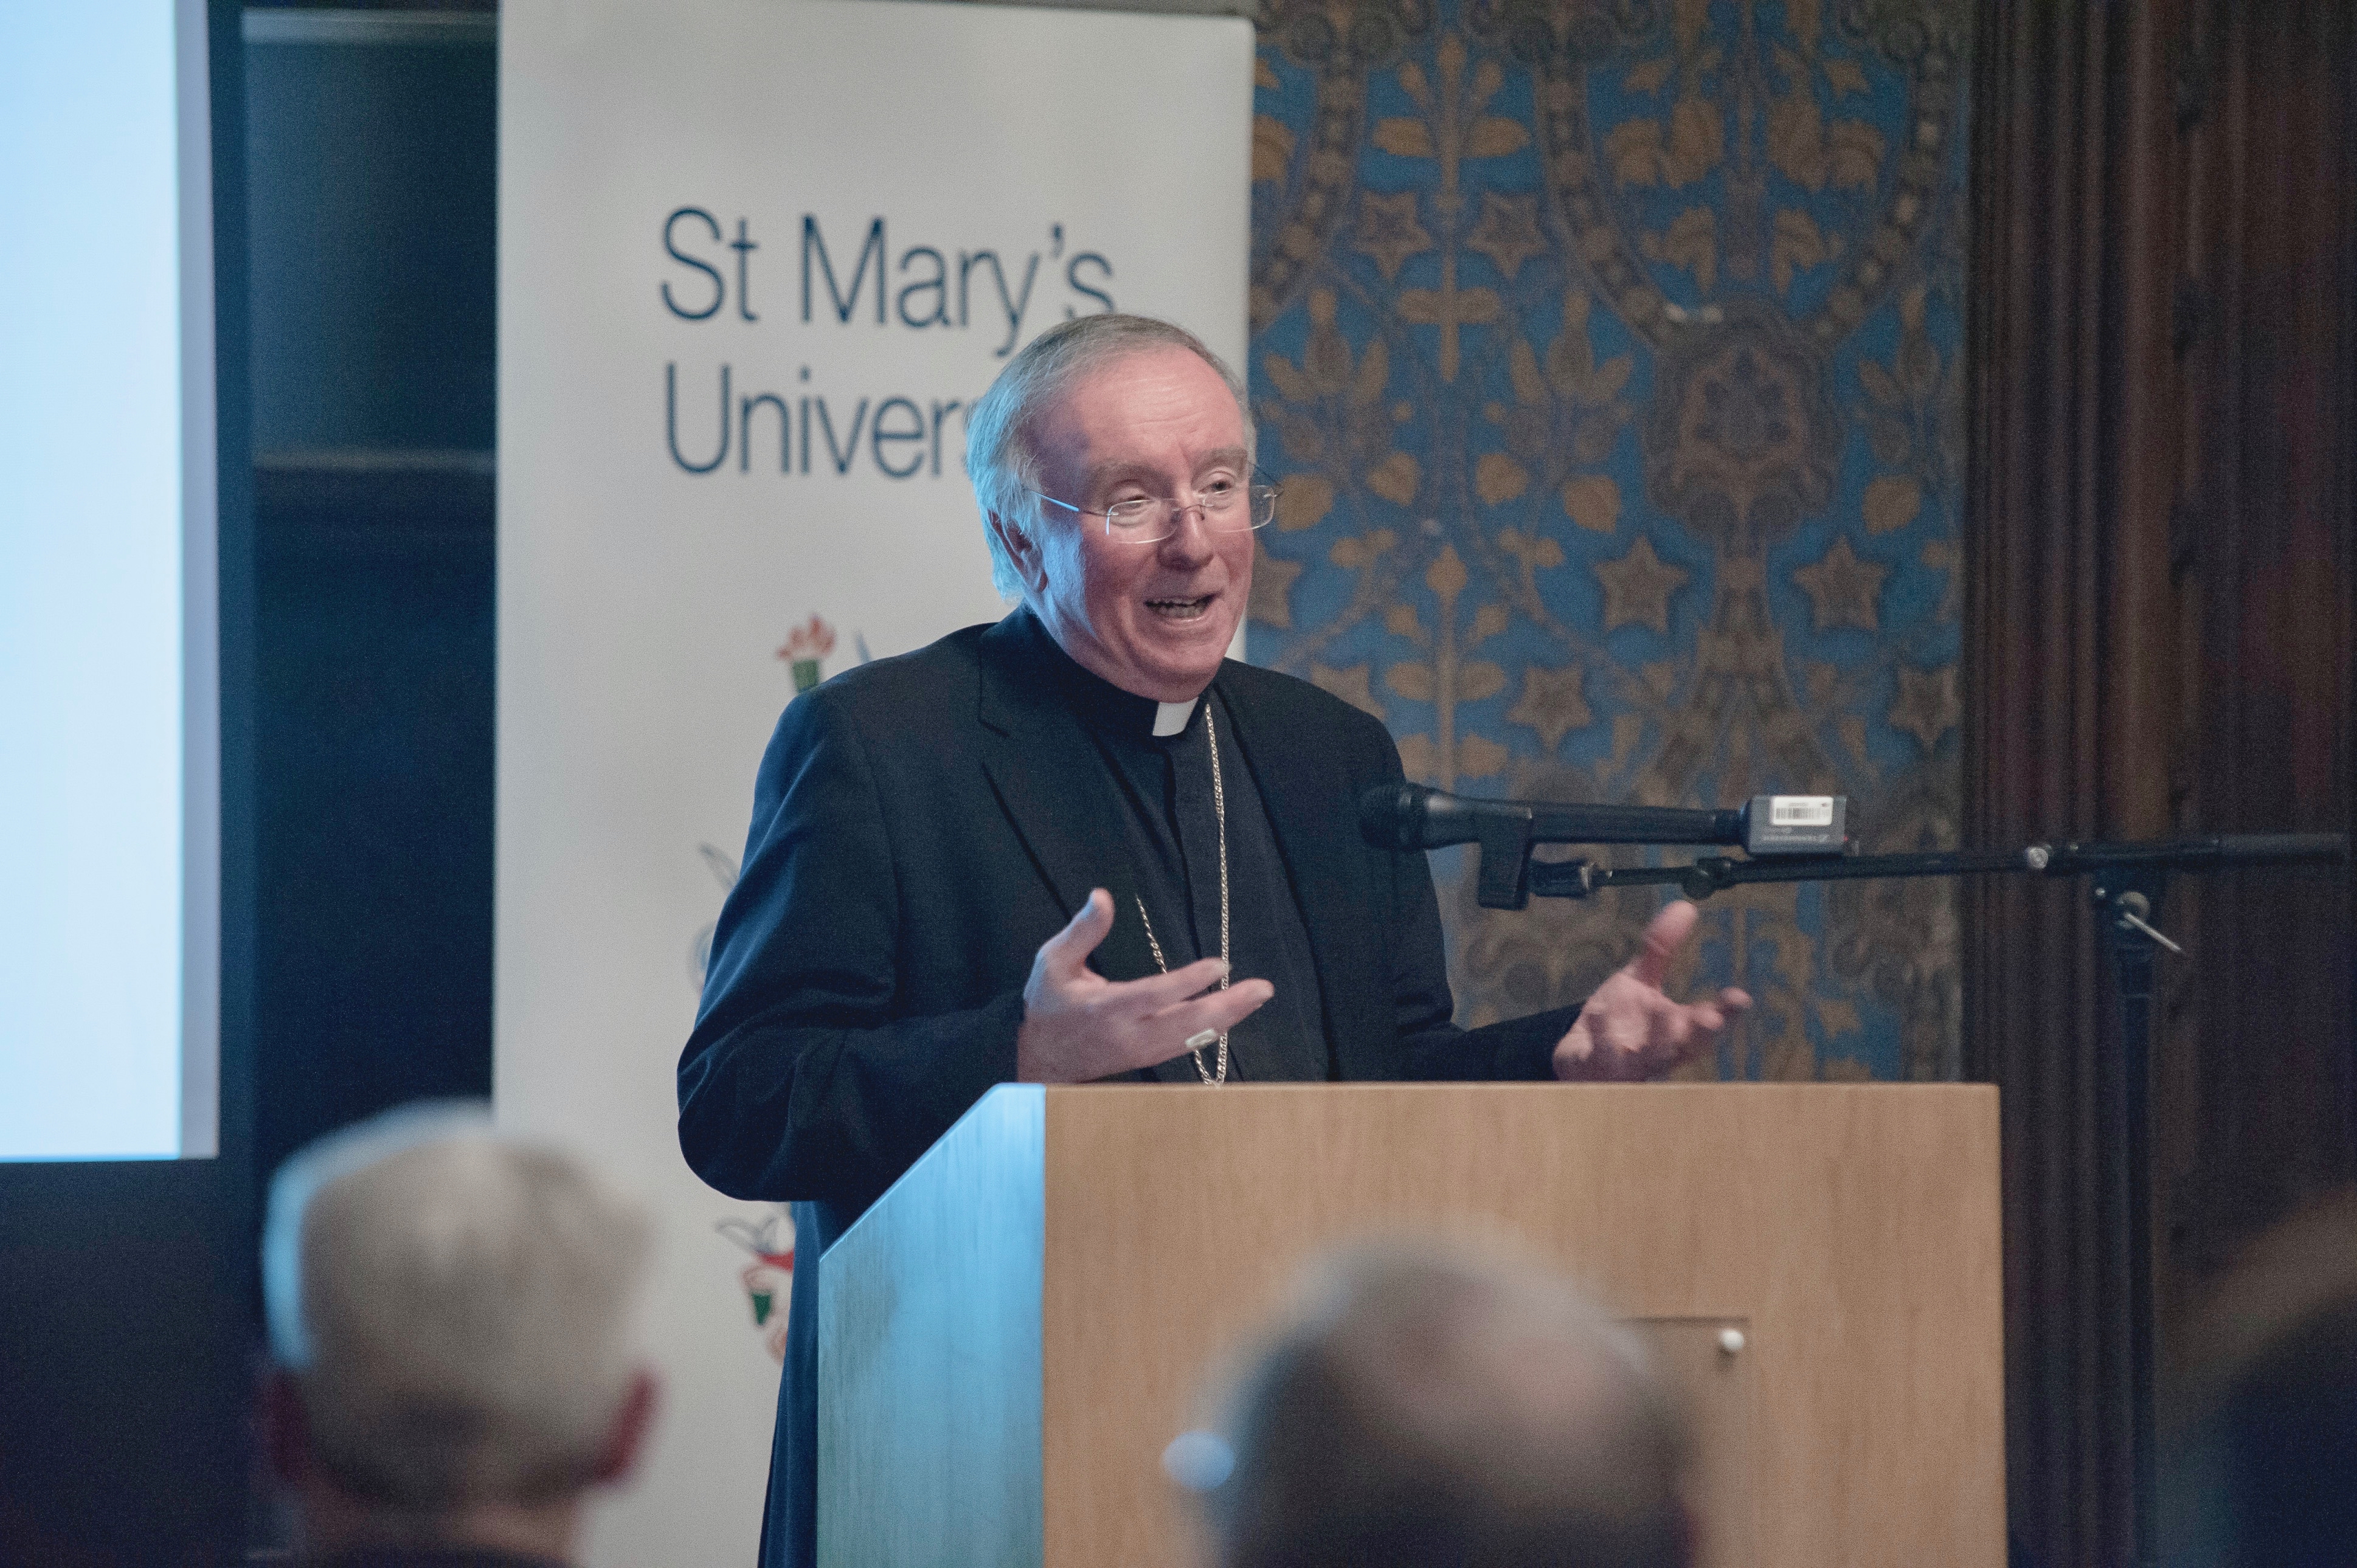 Religion is being excluded from public life, warns bishop